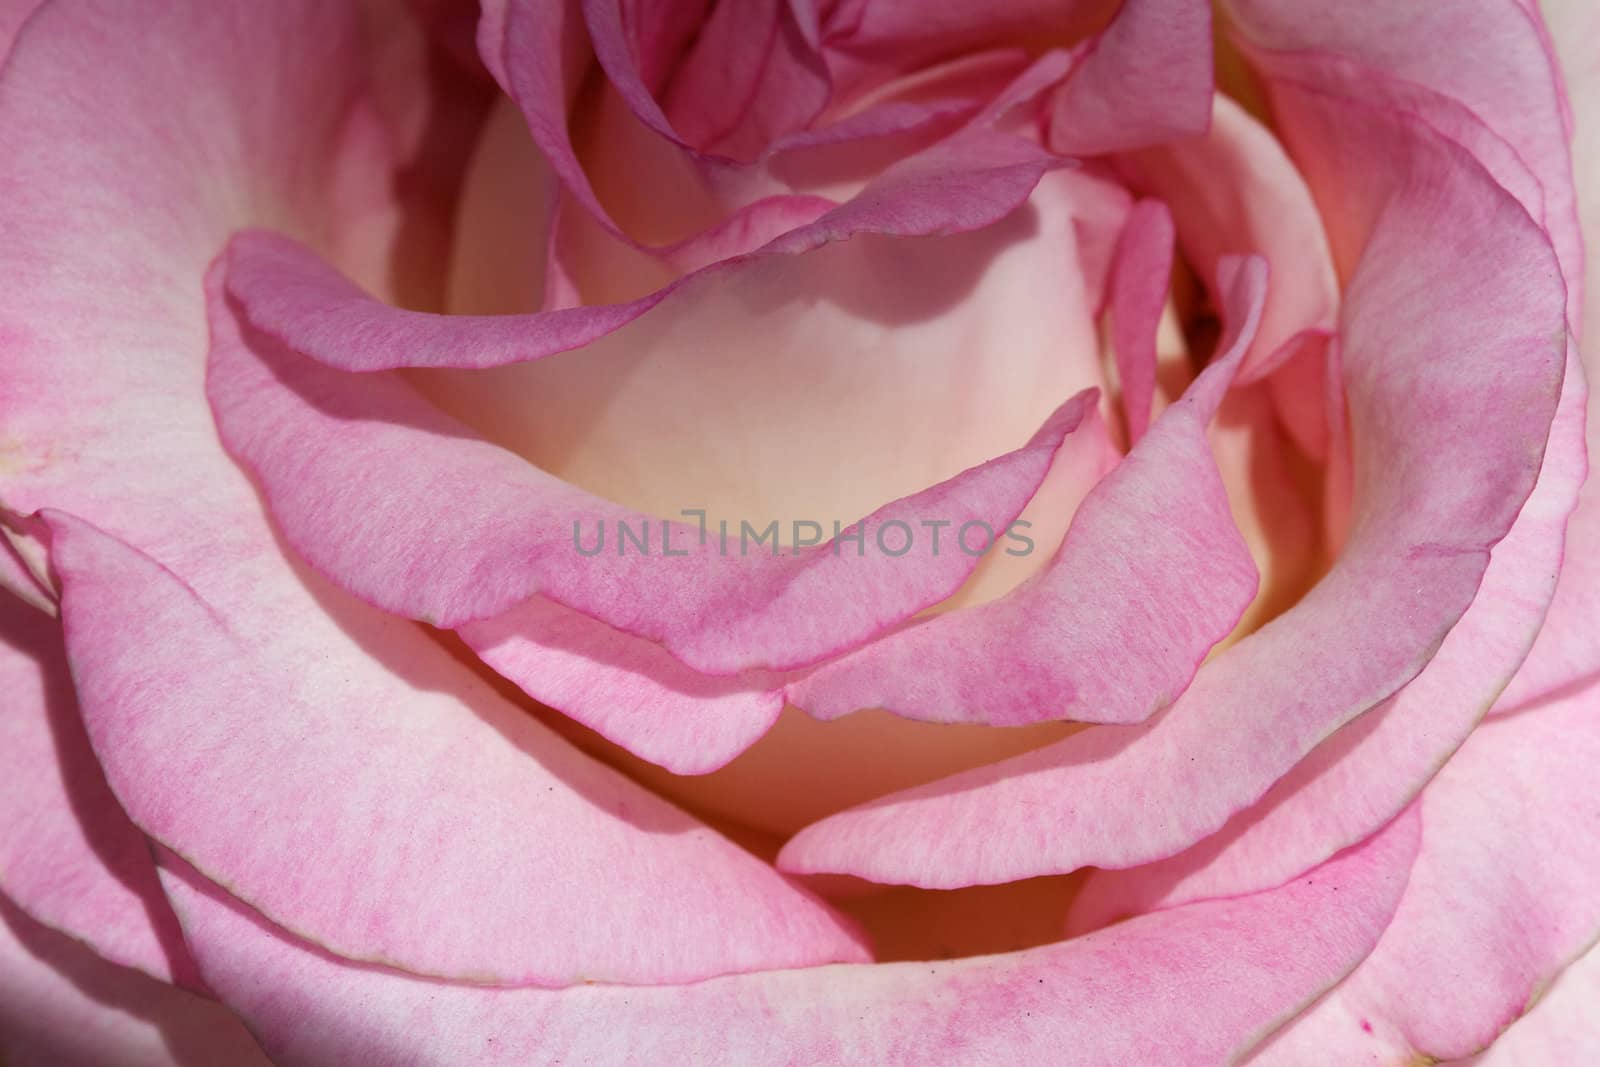 Macro of a portion of pink rose